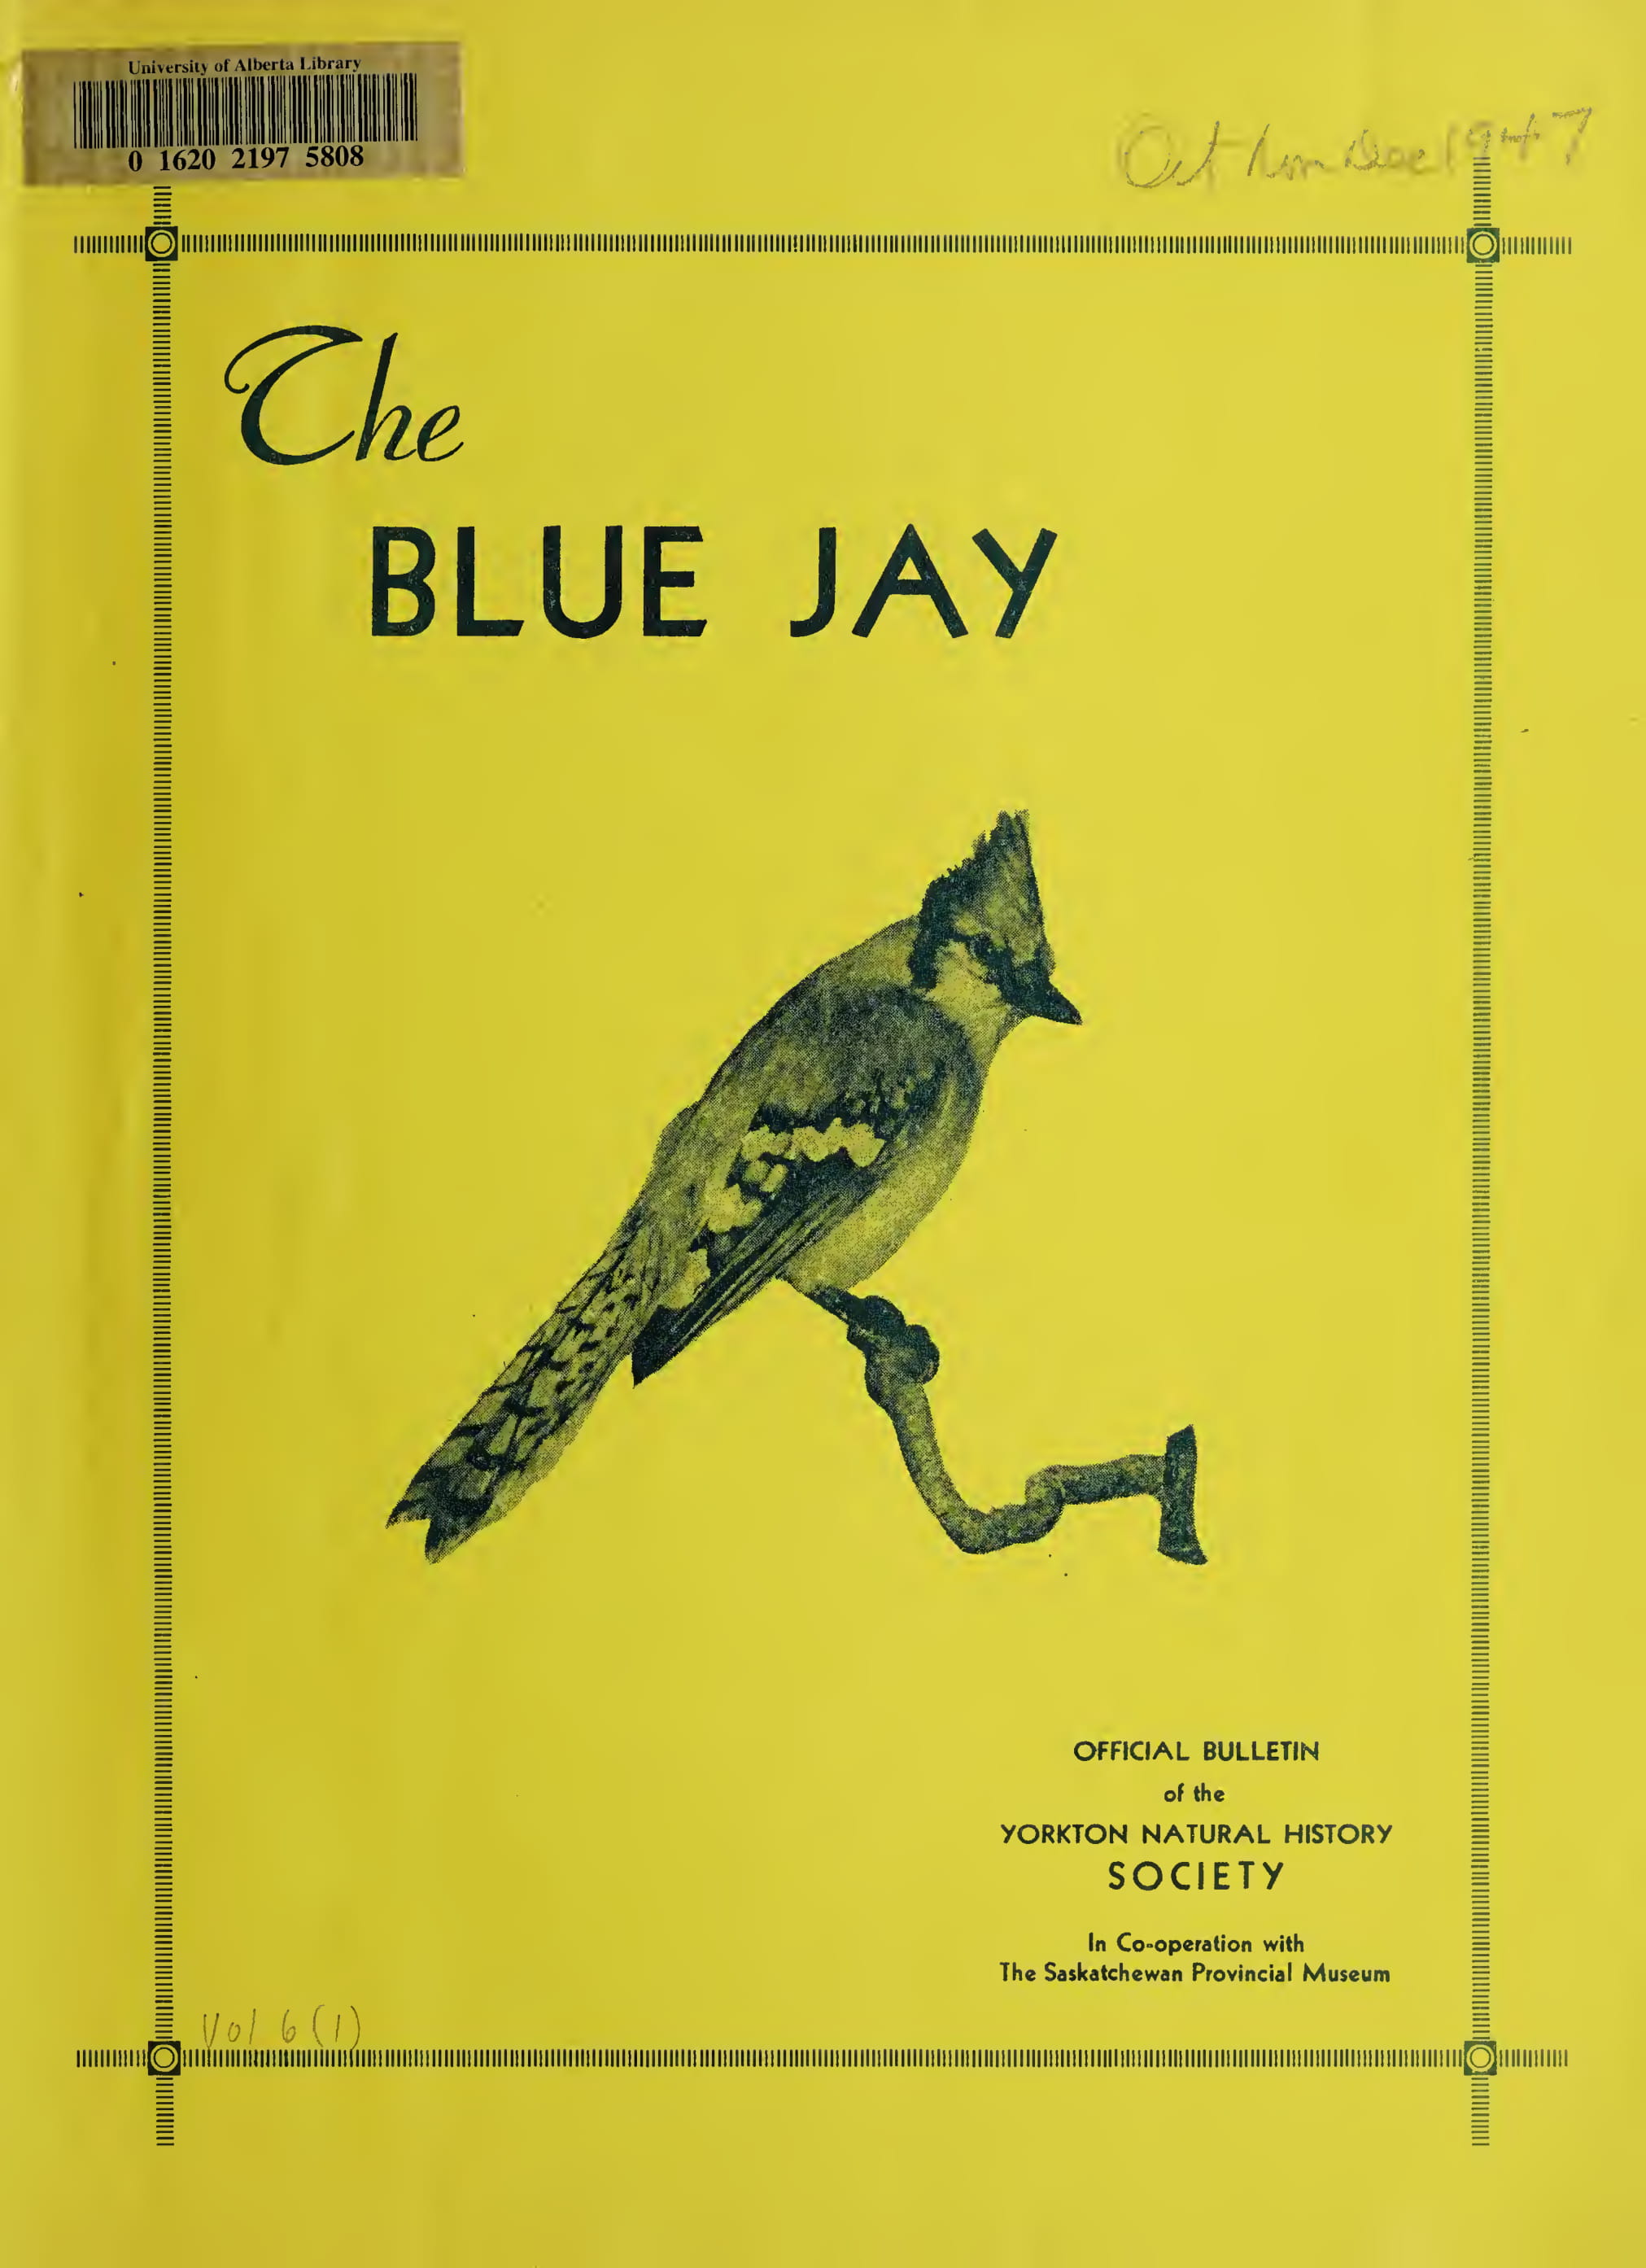 Cover Image for Fall 1947